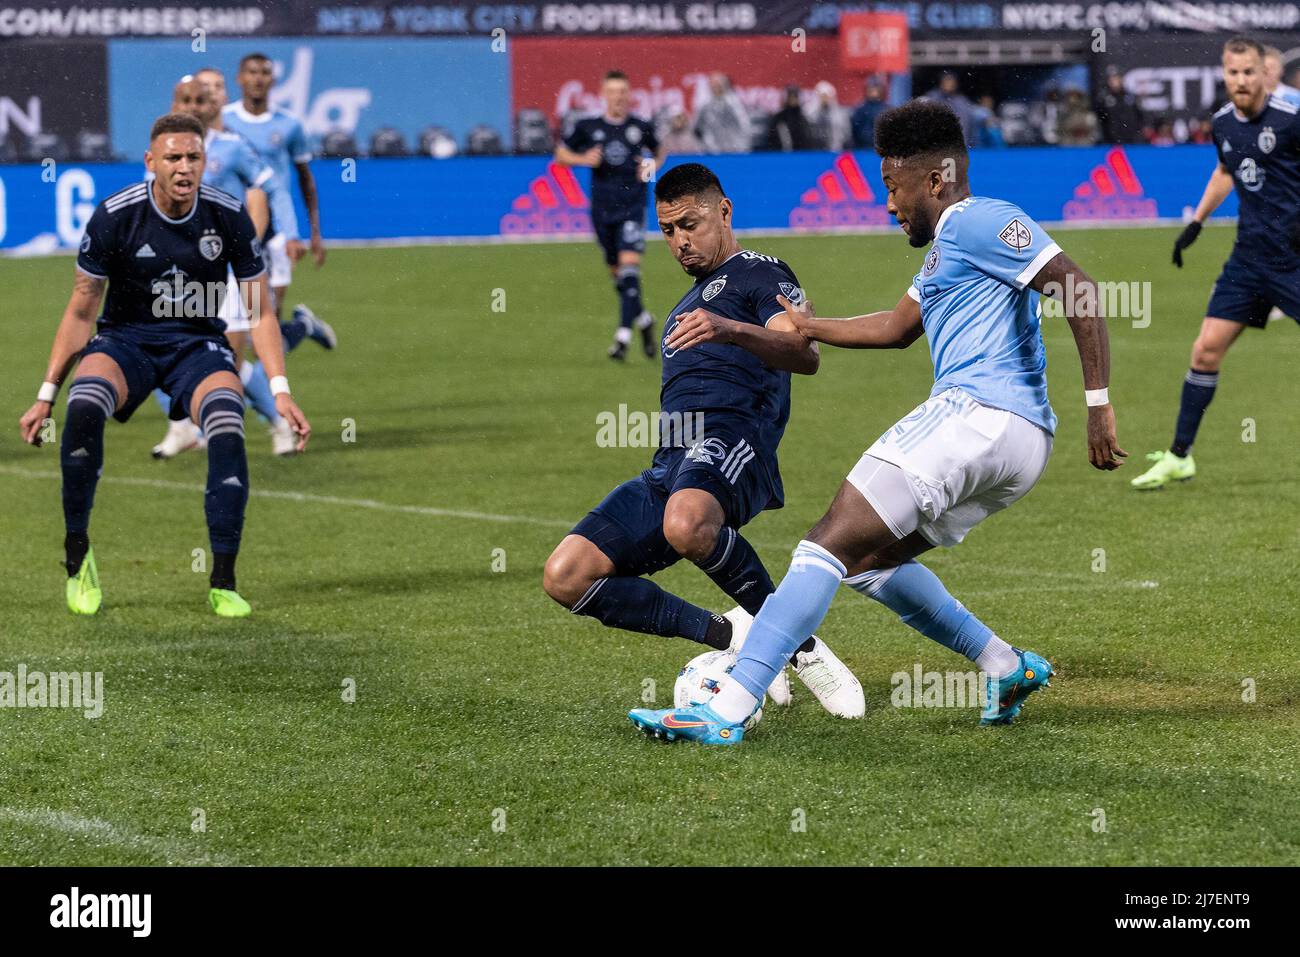 Roger Espinoza (15) of Sporting Kansas City and Chris Gloster (2) of NYCFC fight for the ball during regular MLS game at Citi Field. Game ended in goalless draw. (Photo by Lev Radin/Pacific Press) Stock Photo